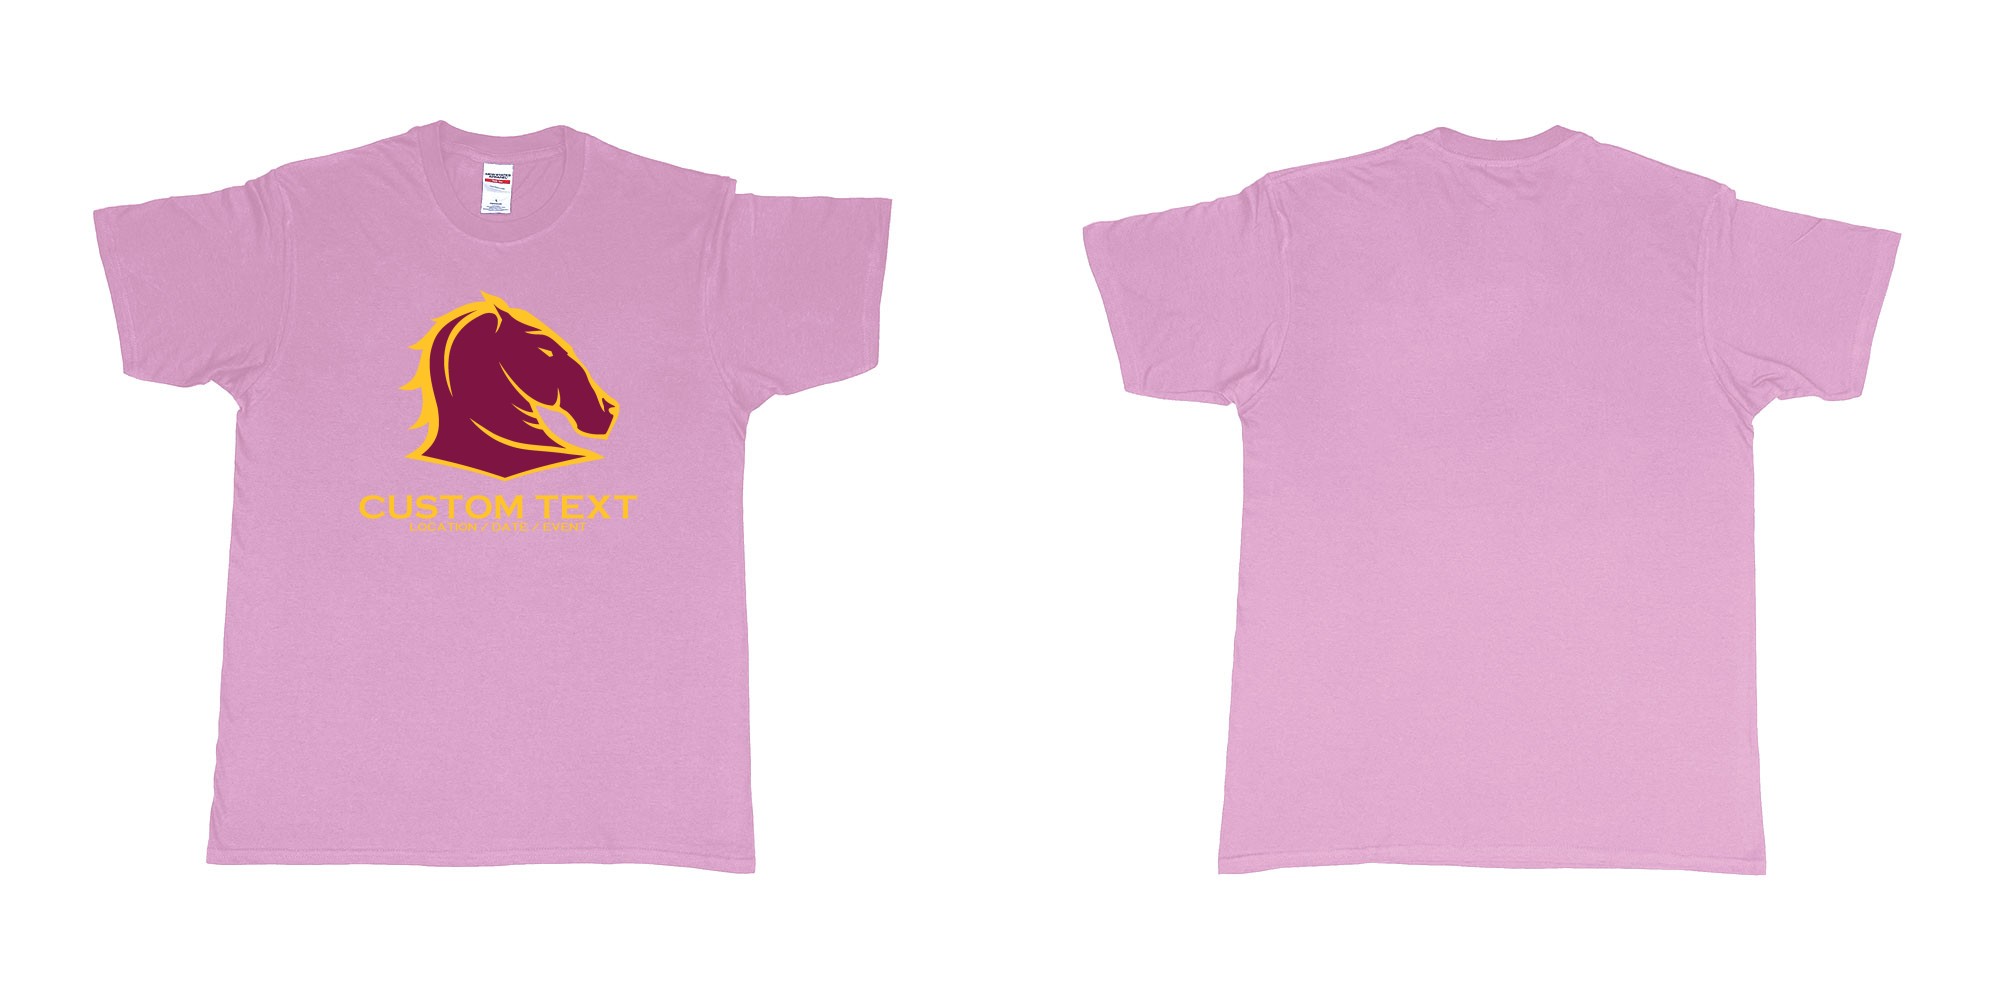 Custom tshirt design brisbane broncos australian professional rugby league football club queensland in fabric color light-pink choice your own text made in Bali by The Pirate Way